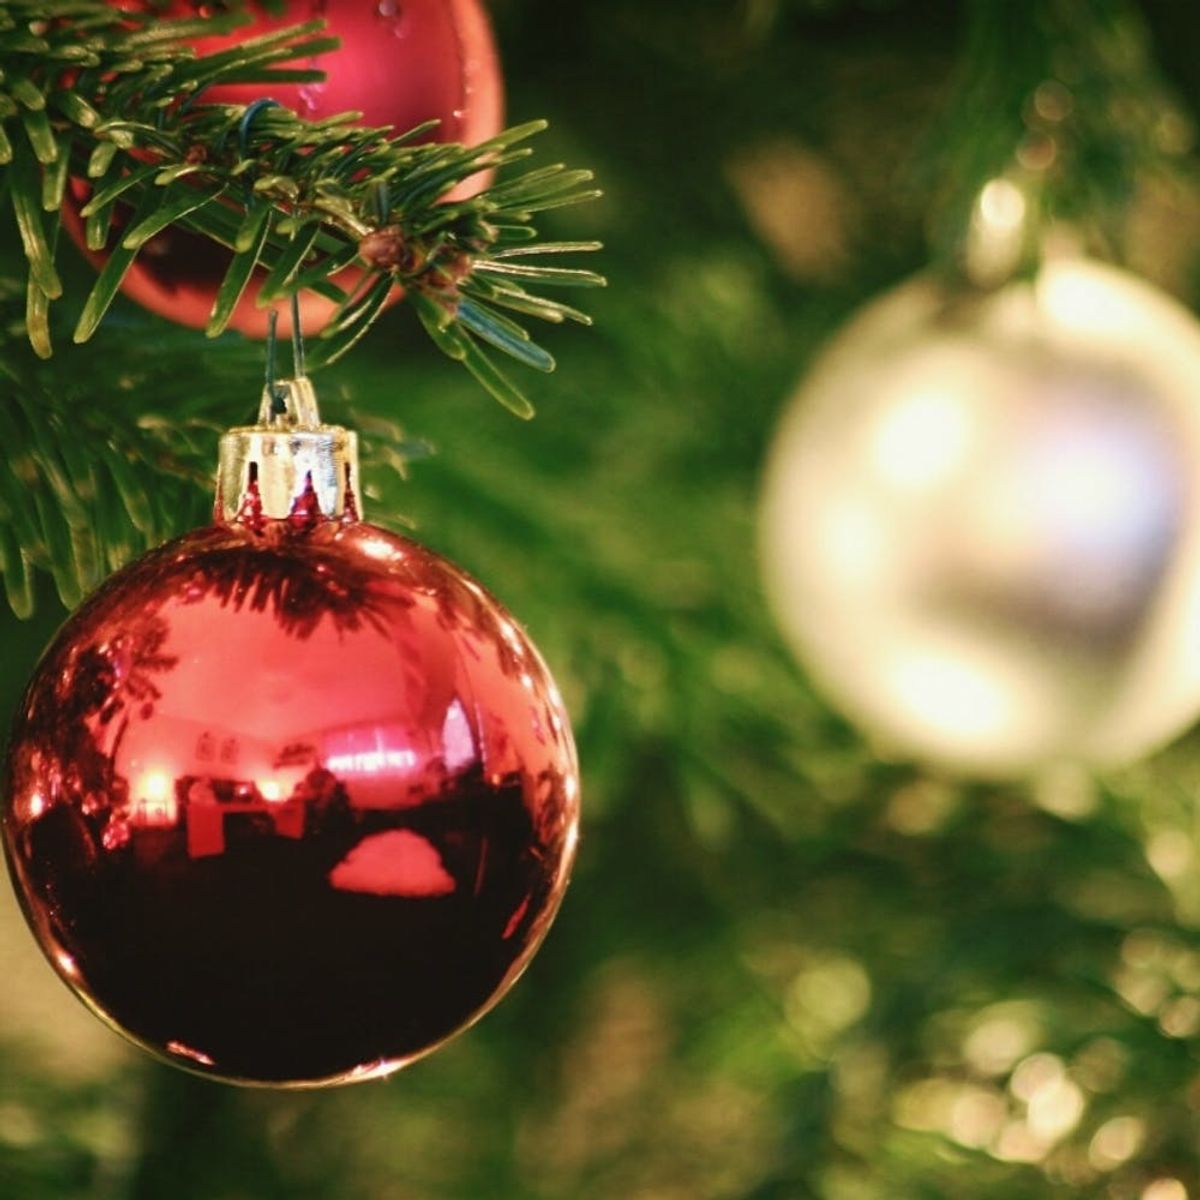 Here’s Why This Controversial Christmas Ornament Had to Be Removed from Amazon